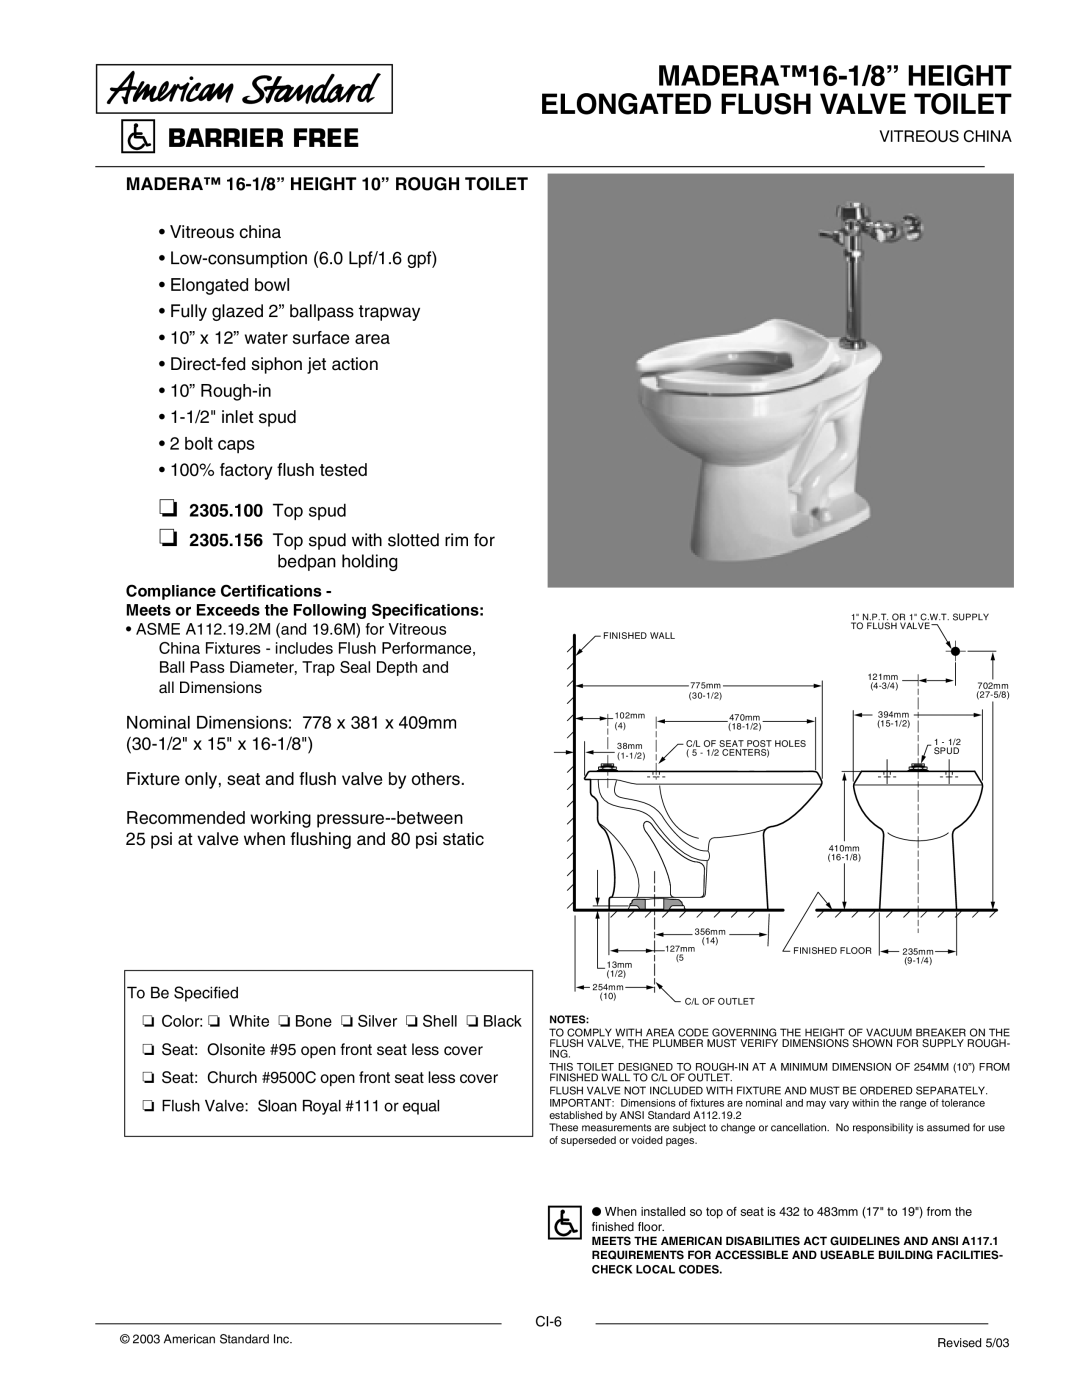 American Standard 2305.100 specifications MADERA16-1/8”HEIGHT ELONGATED FLUSH VALVE TOILET, Barrier Free, Top spud 